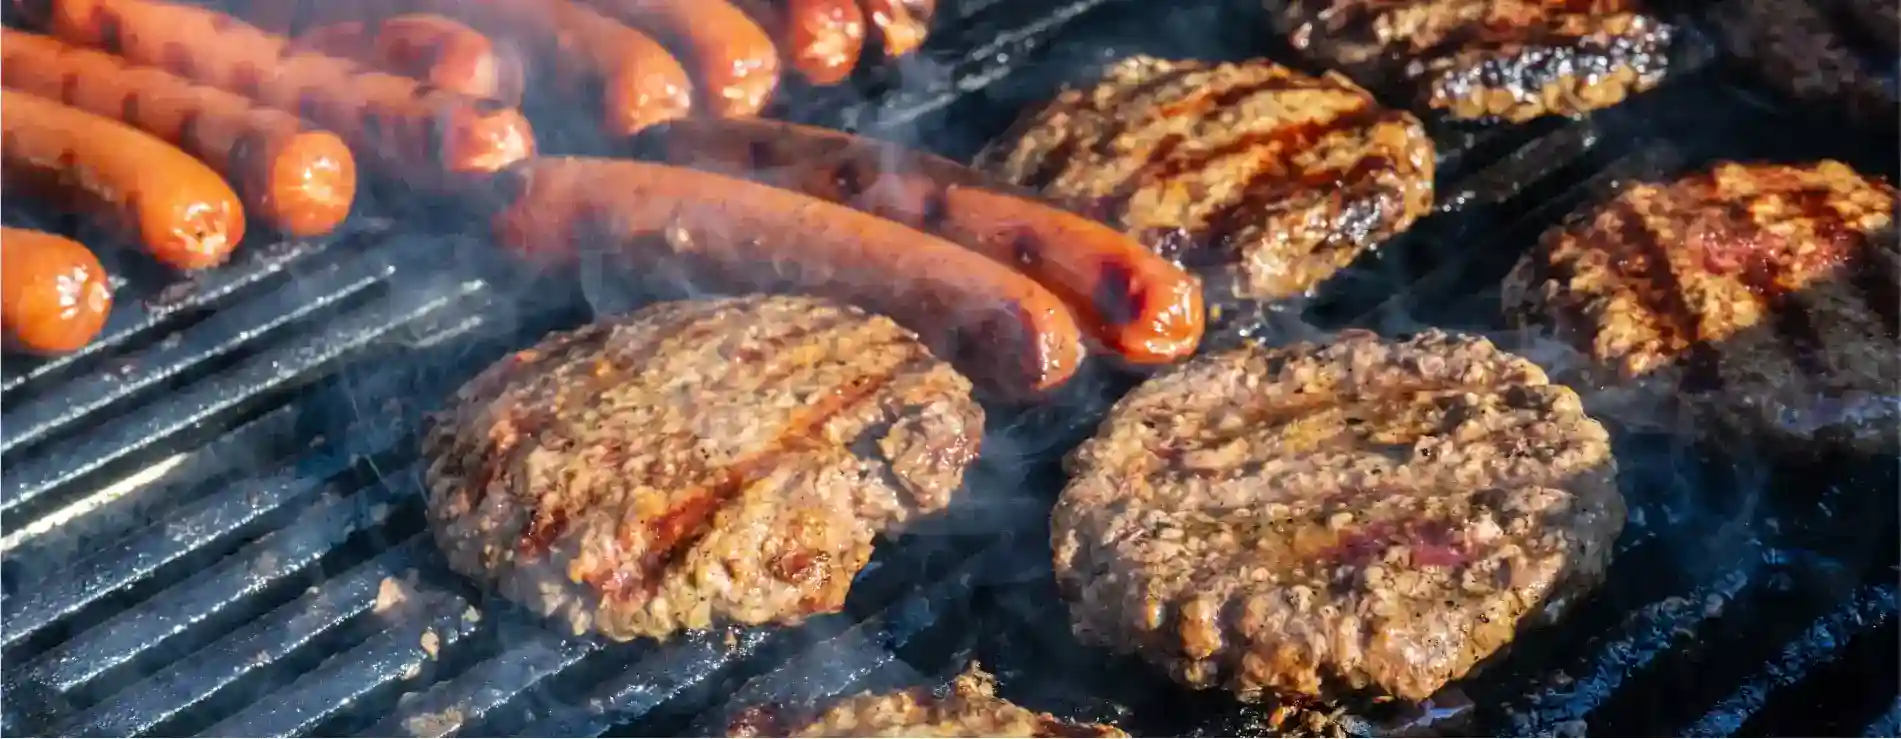 BBQ Catering Burgers